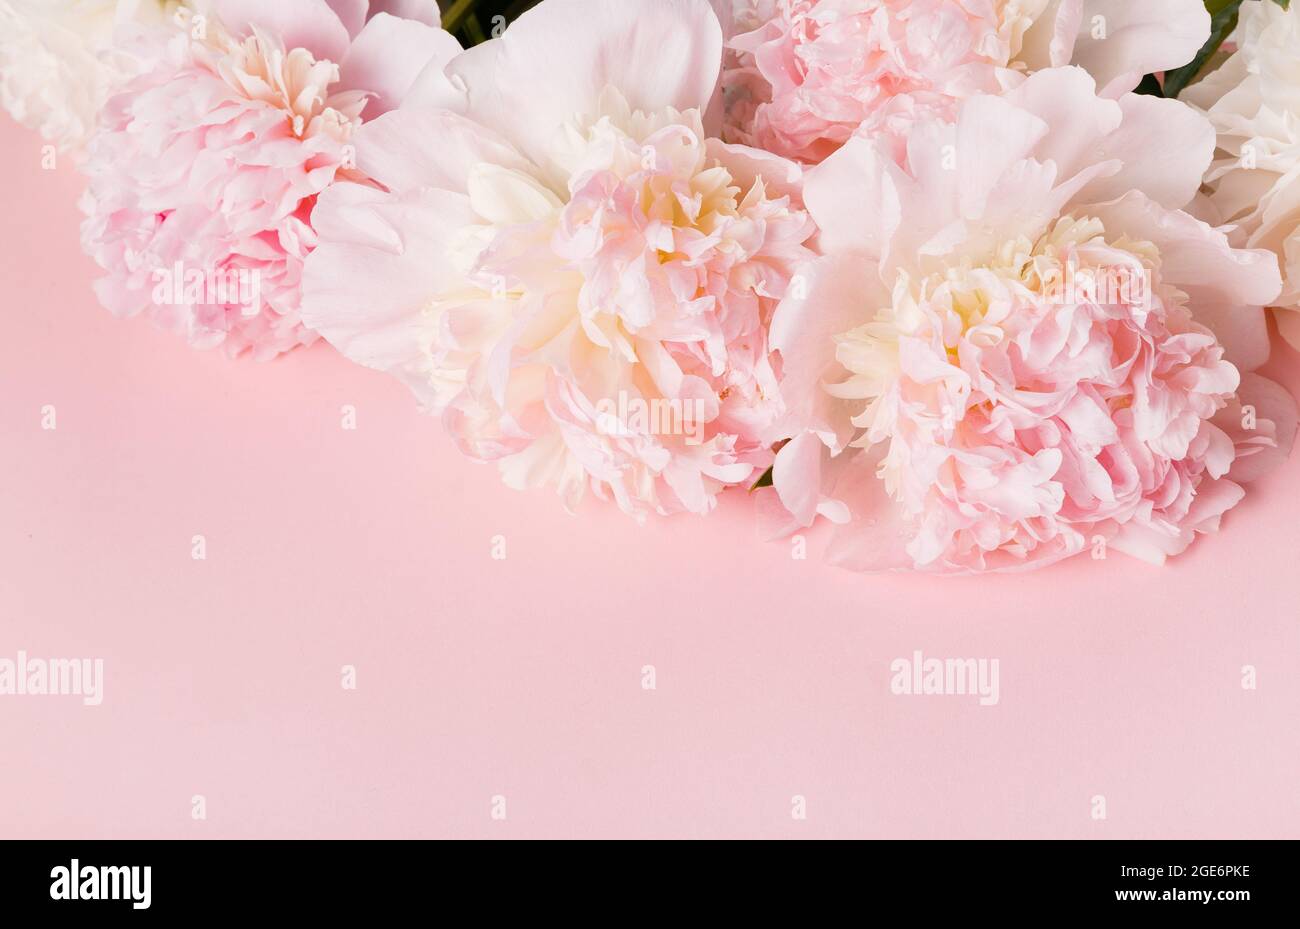 Festive flower pink peony composition on the pink background. Overhead top view, flat lay. Copy space. Stock Photo